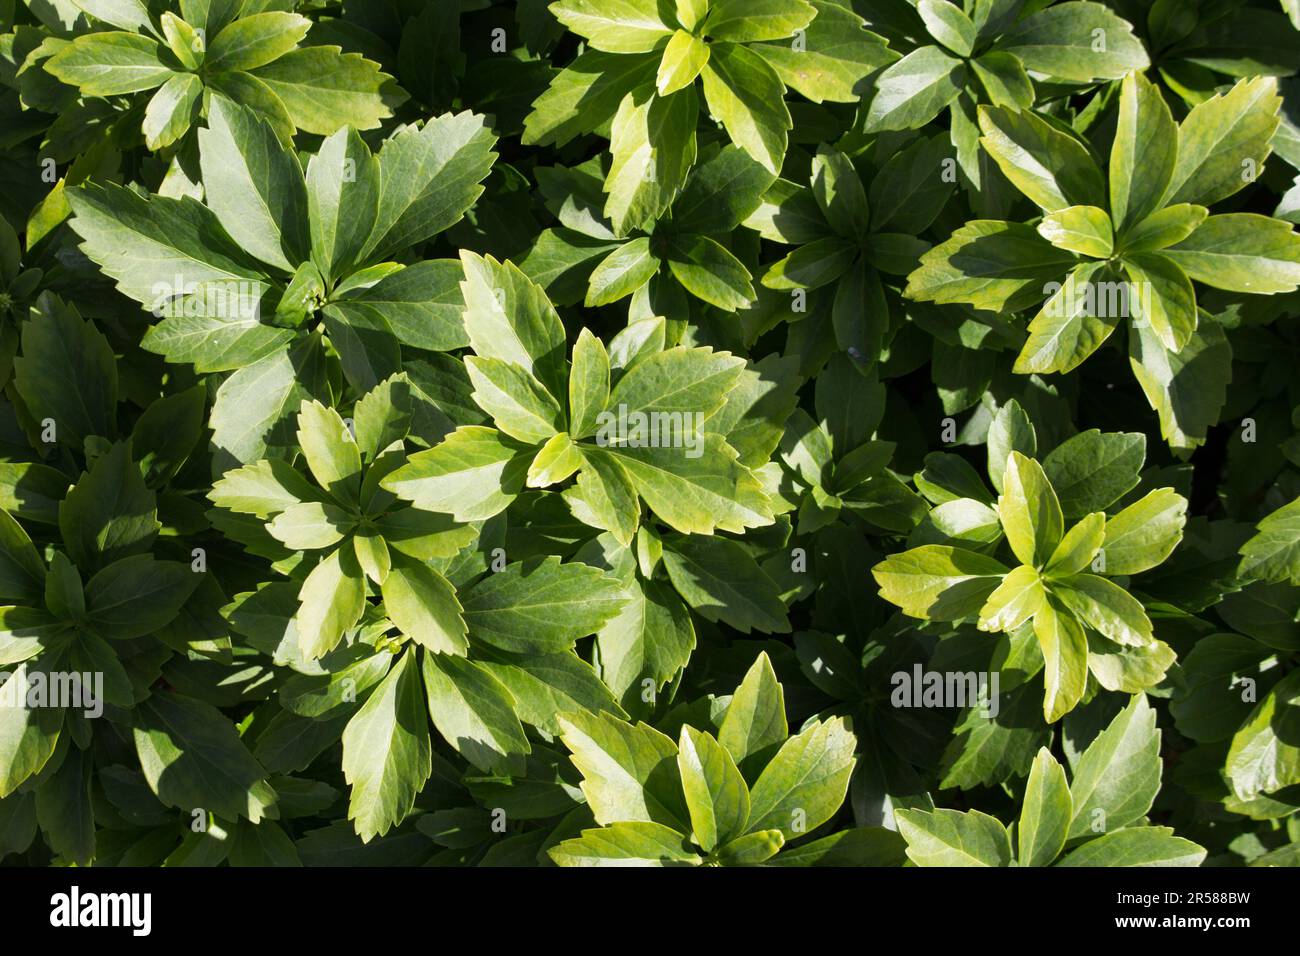 Close-up of a pachysandra shrub, natural background. The Pachysandra plant, which forms dense thickets, is used in urban landscaping, landscape design Stock Photo